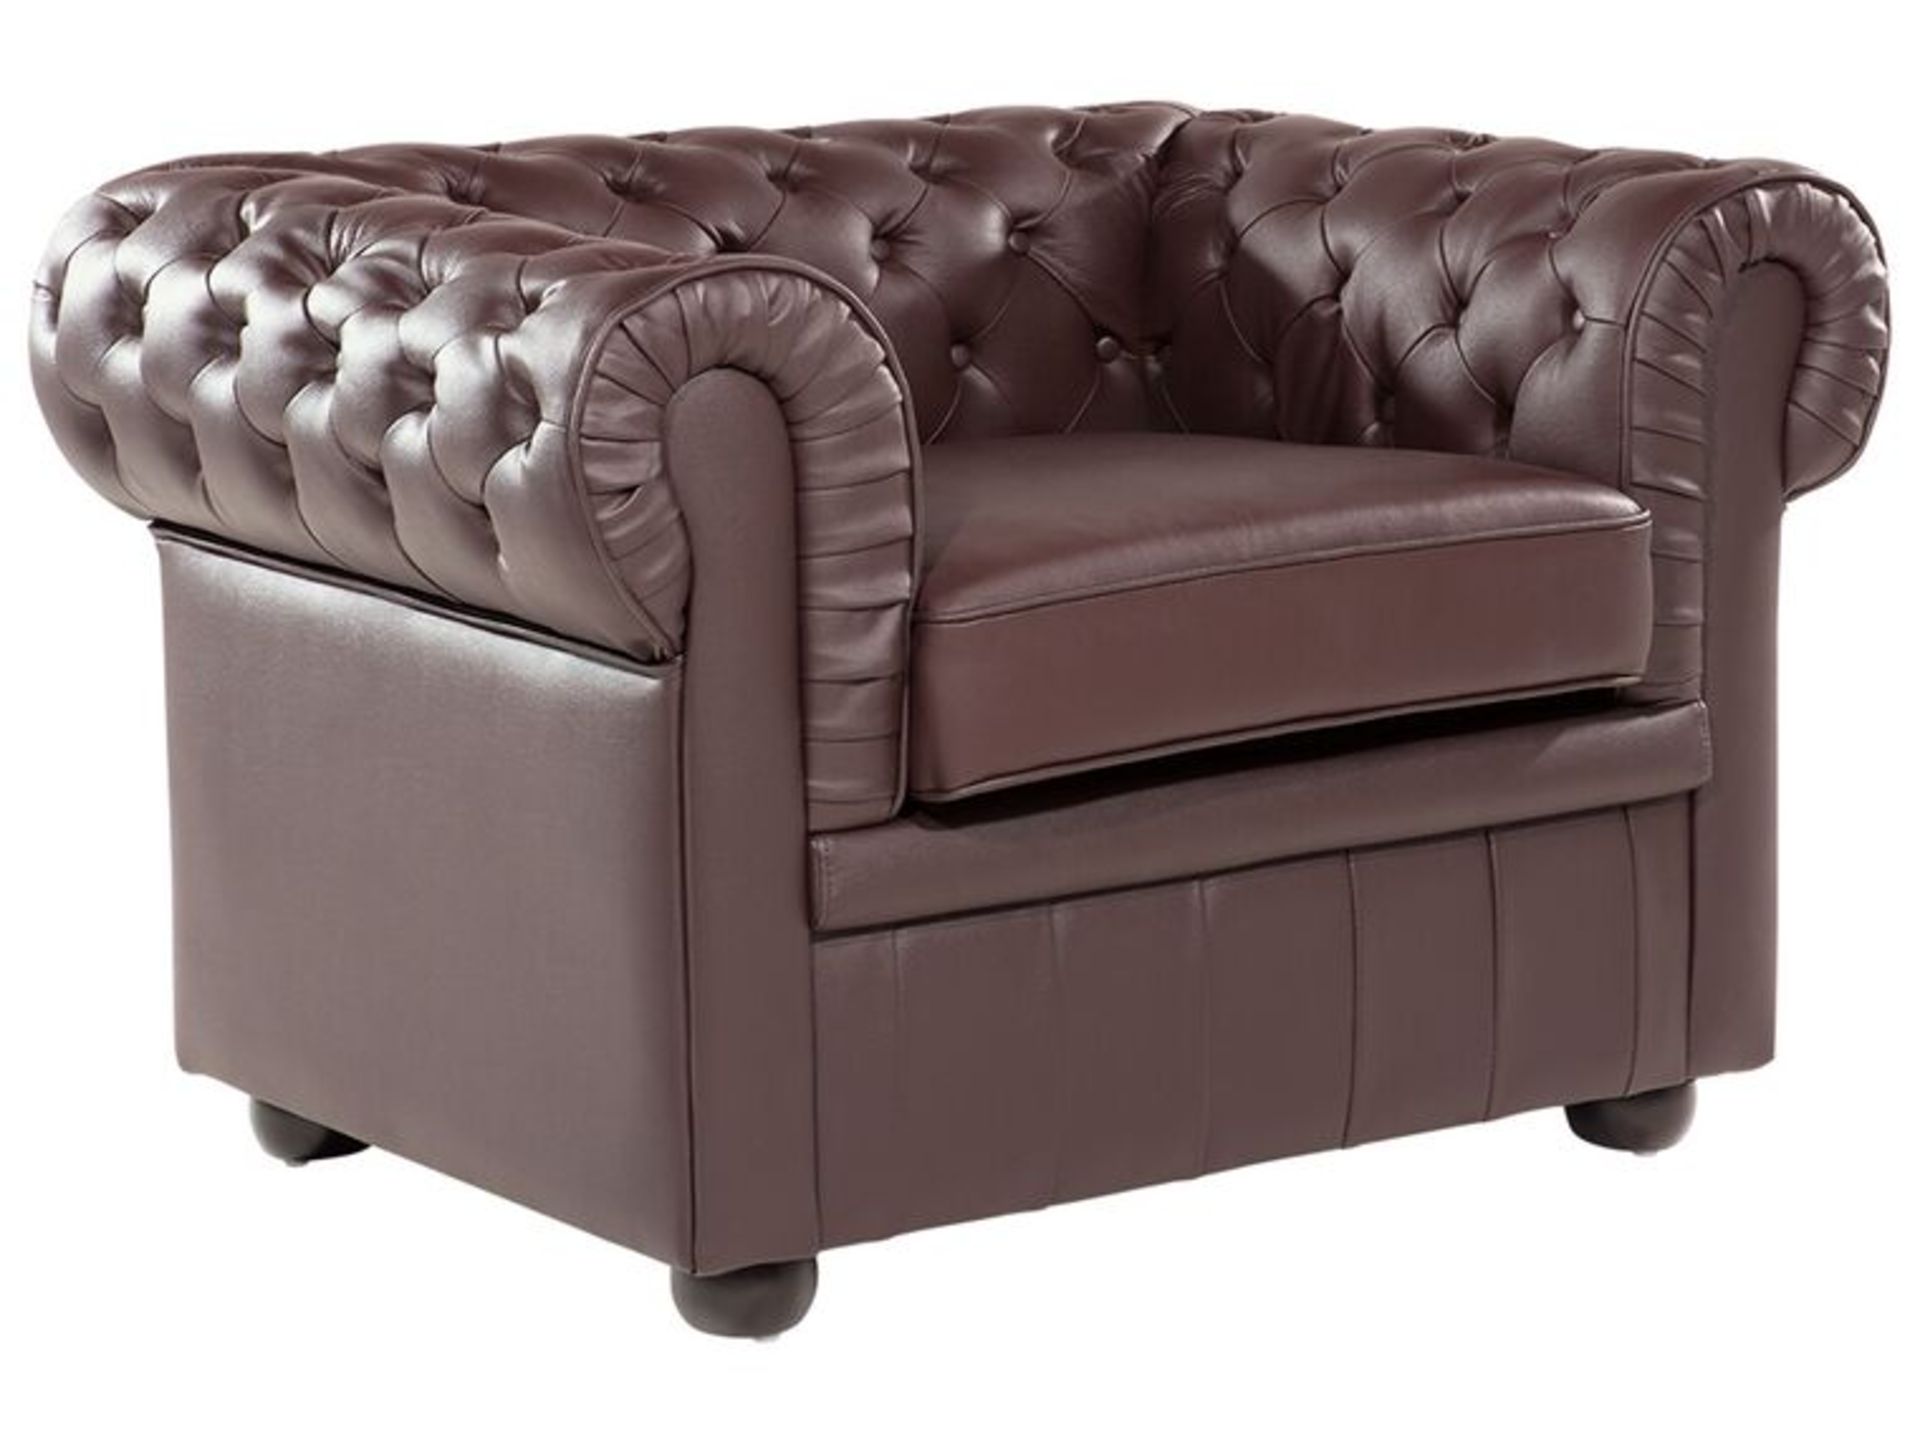 Chesterfield Leather Armchair Brown. - R13a.4. RRP £639.99. A beautiful armchair in brown